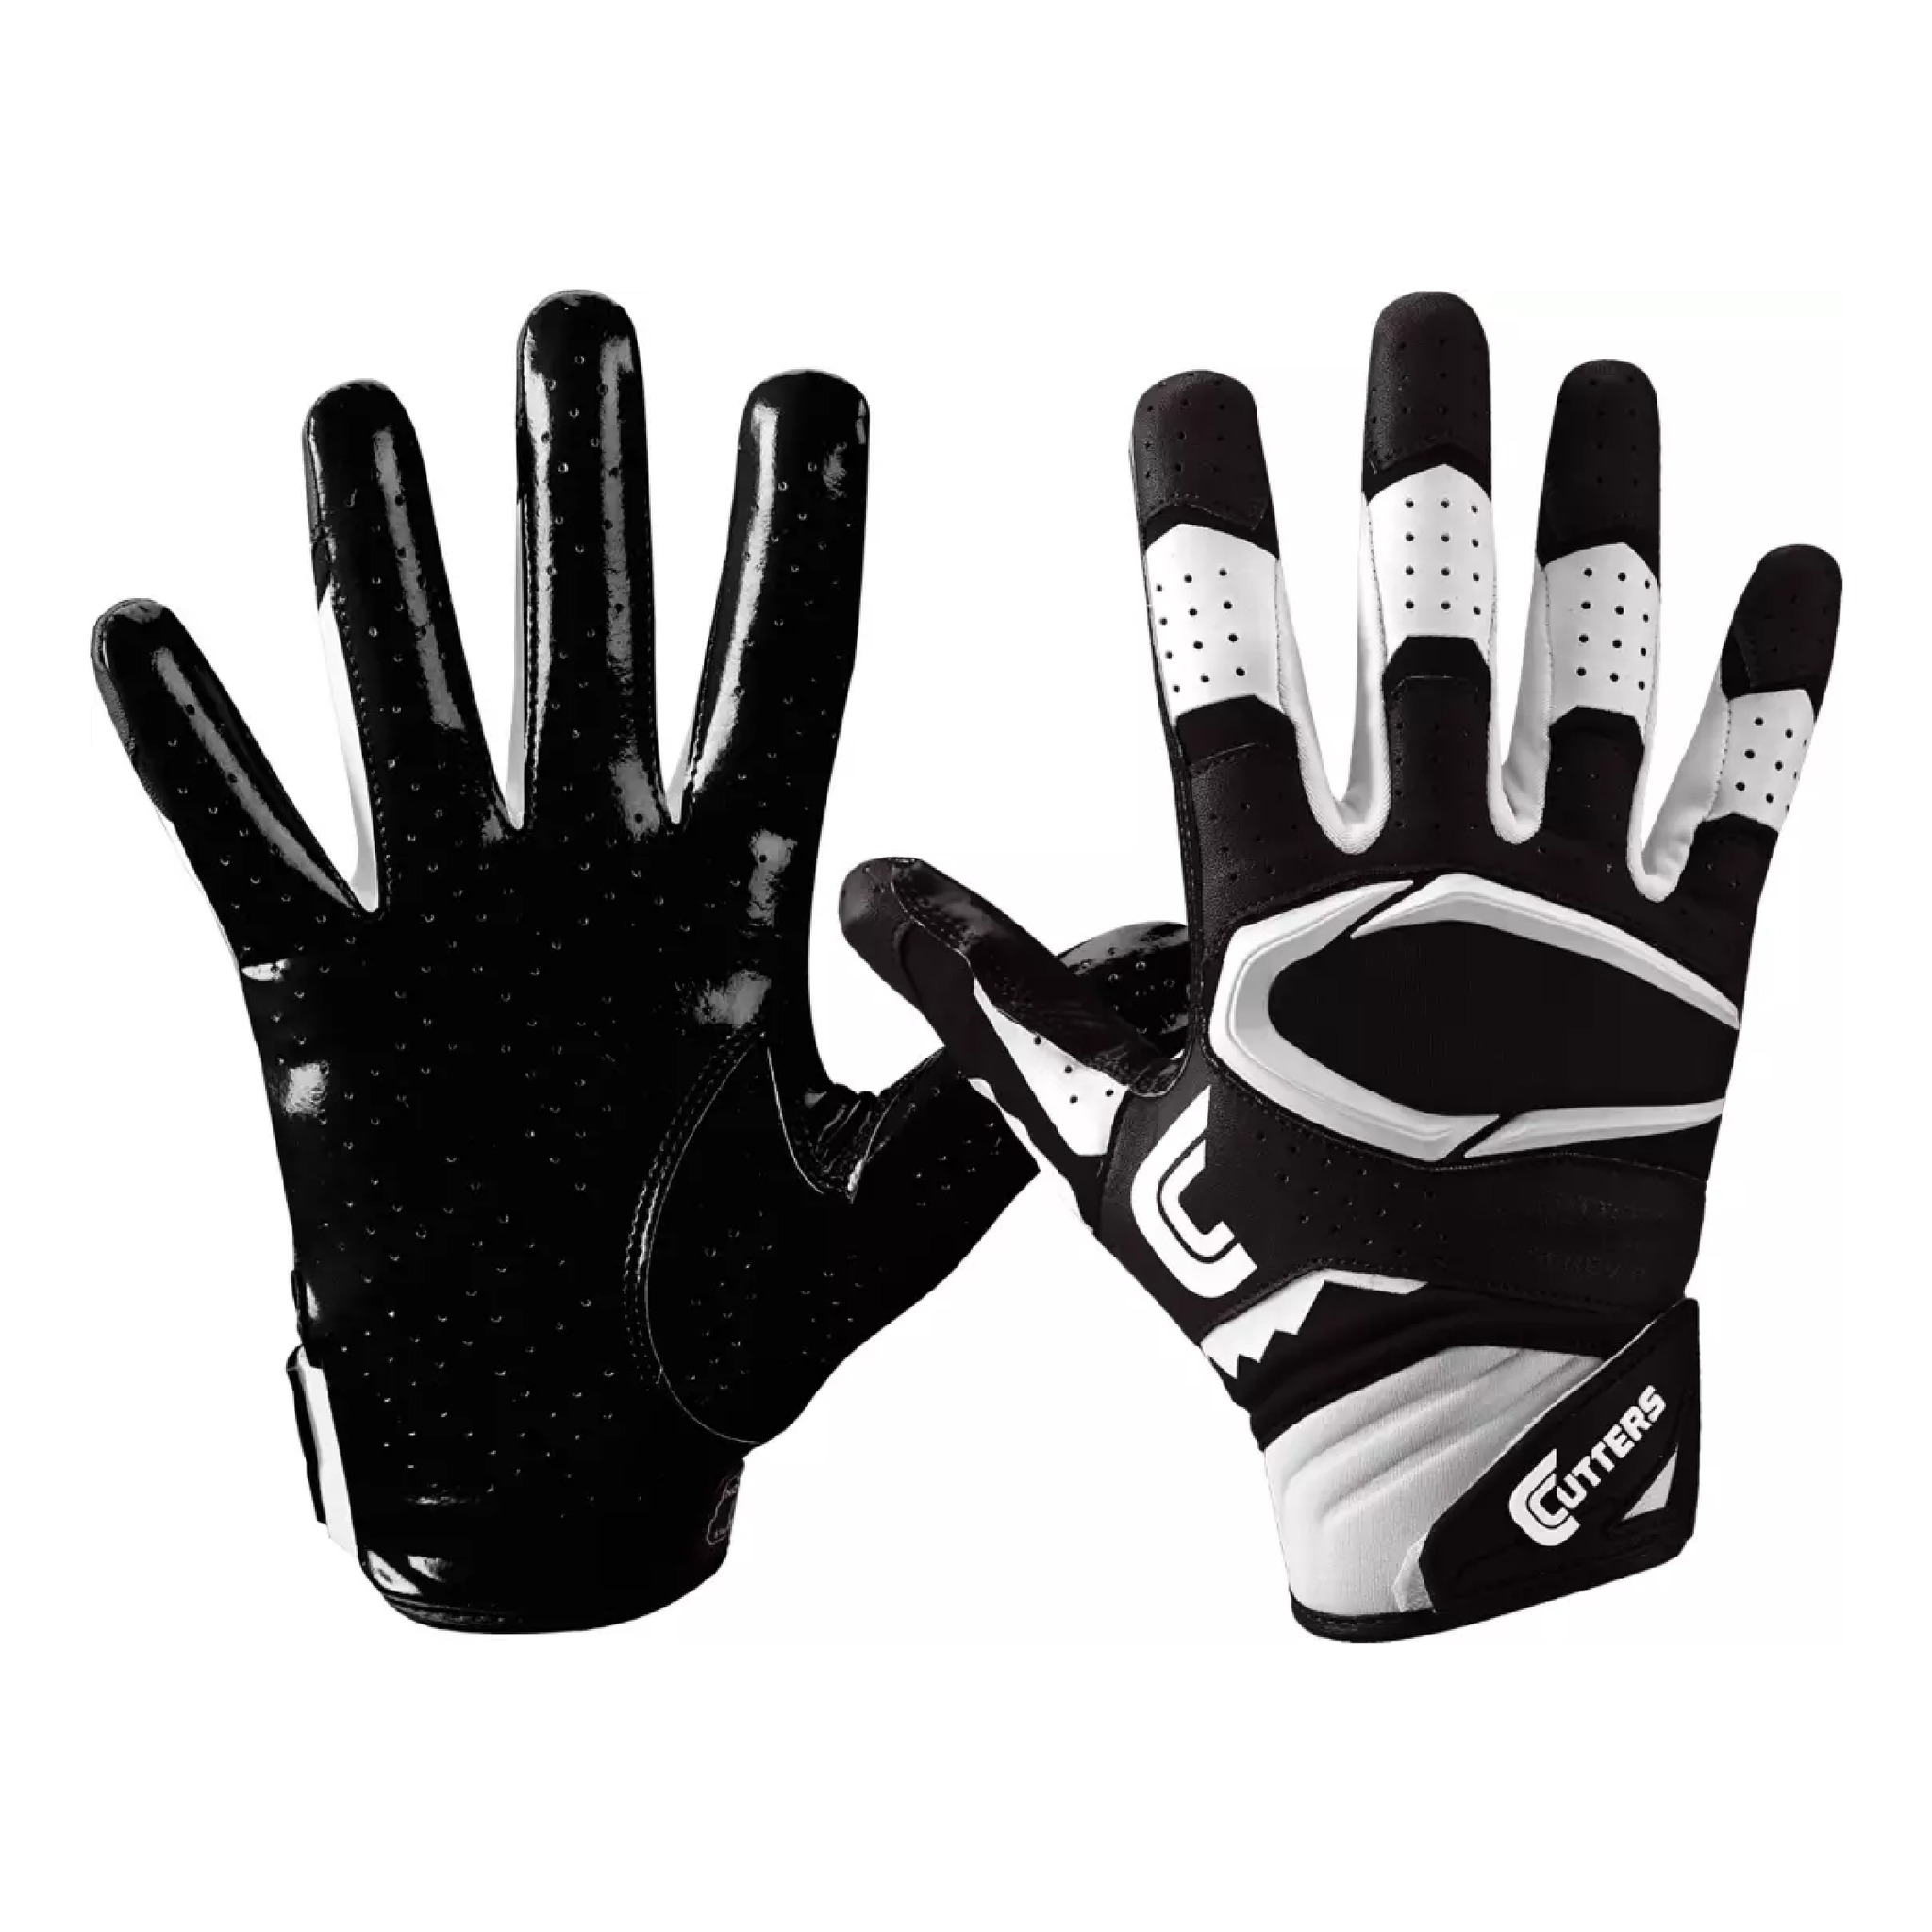 Cutters Rev Pro 2.0 Receiver Gloves